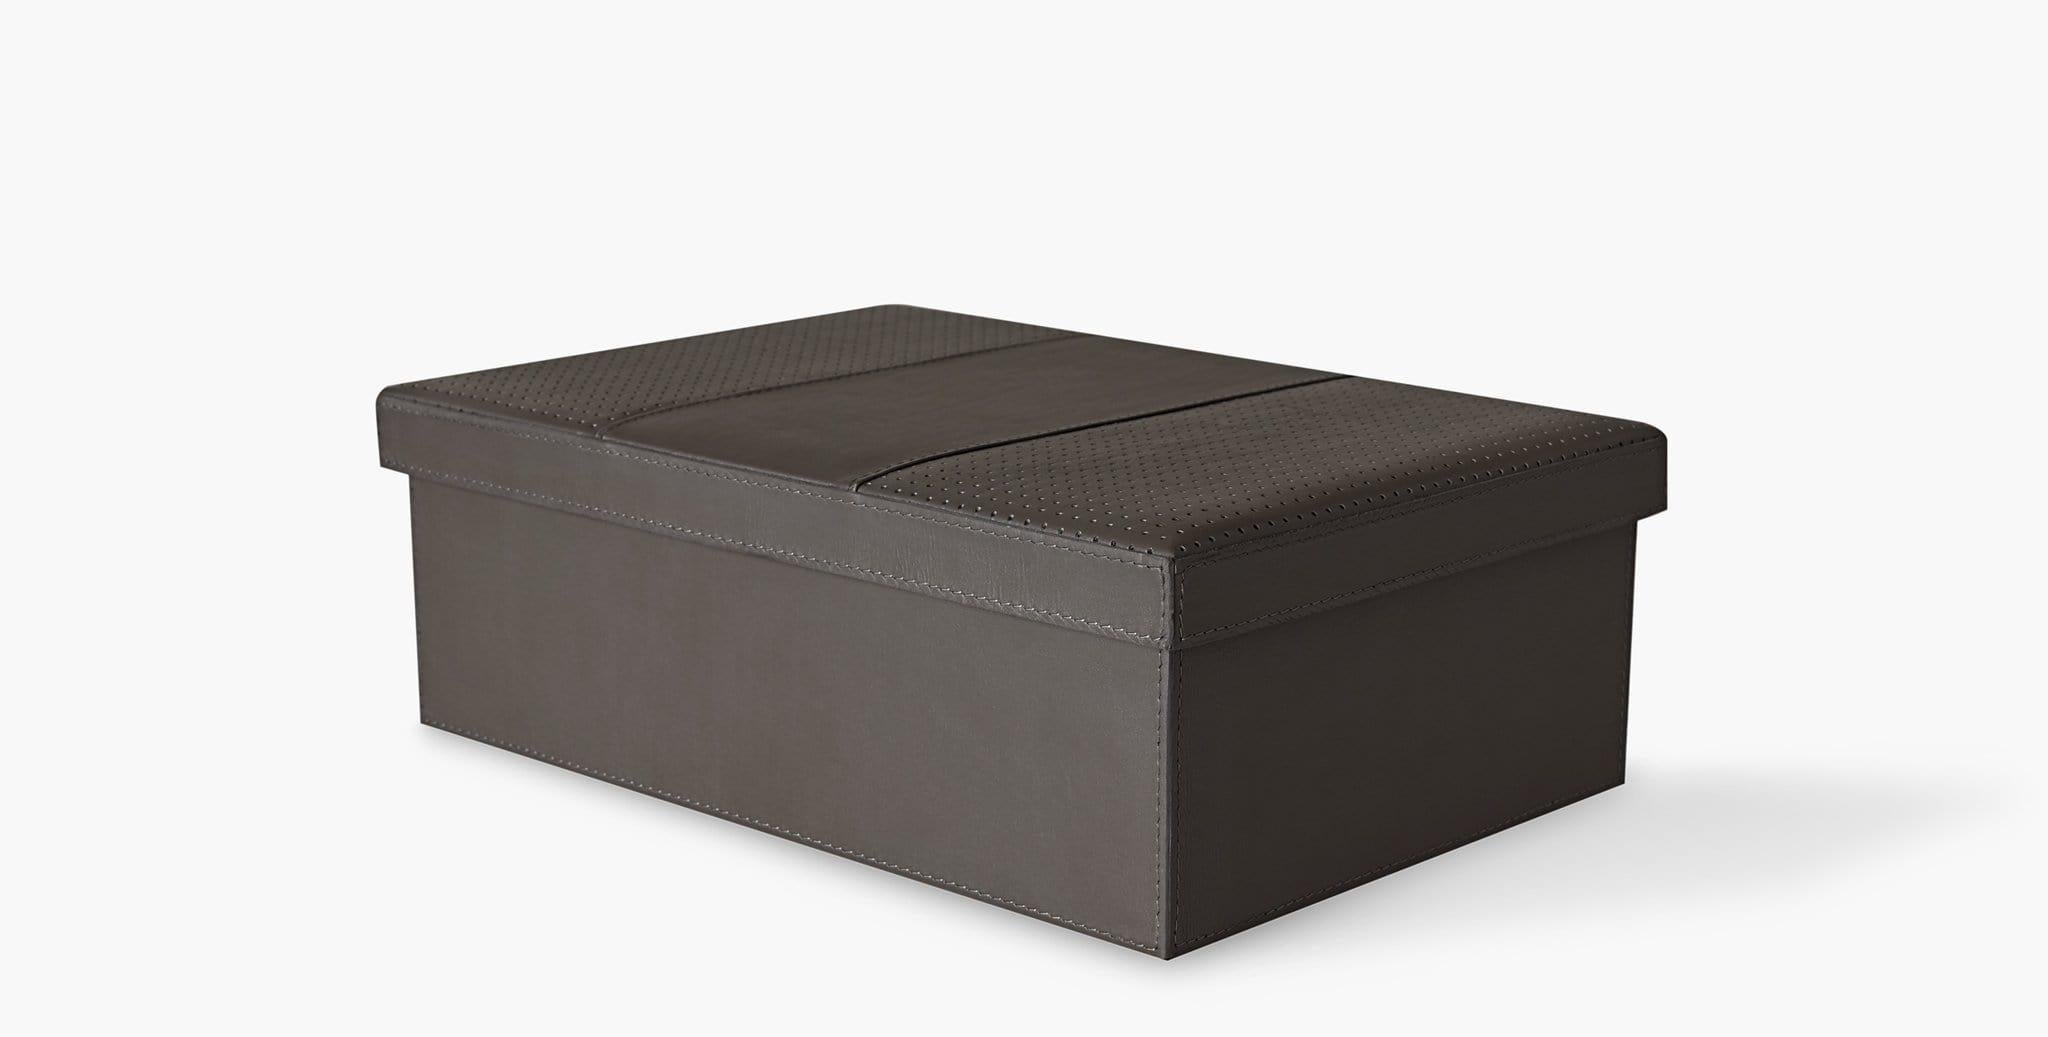 Our Nova Boxes feature a perforated leather lid detail and tonal lining, providing a functional accent in your home office. Our handcrafted fabrics, leathers, and finishes are inspired by the natural variations within fibers, textures, and weaves.